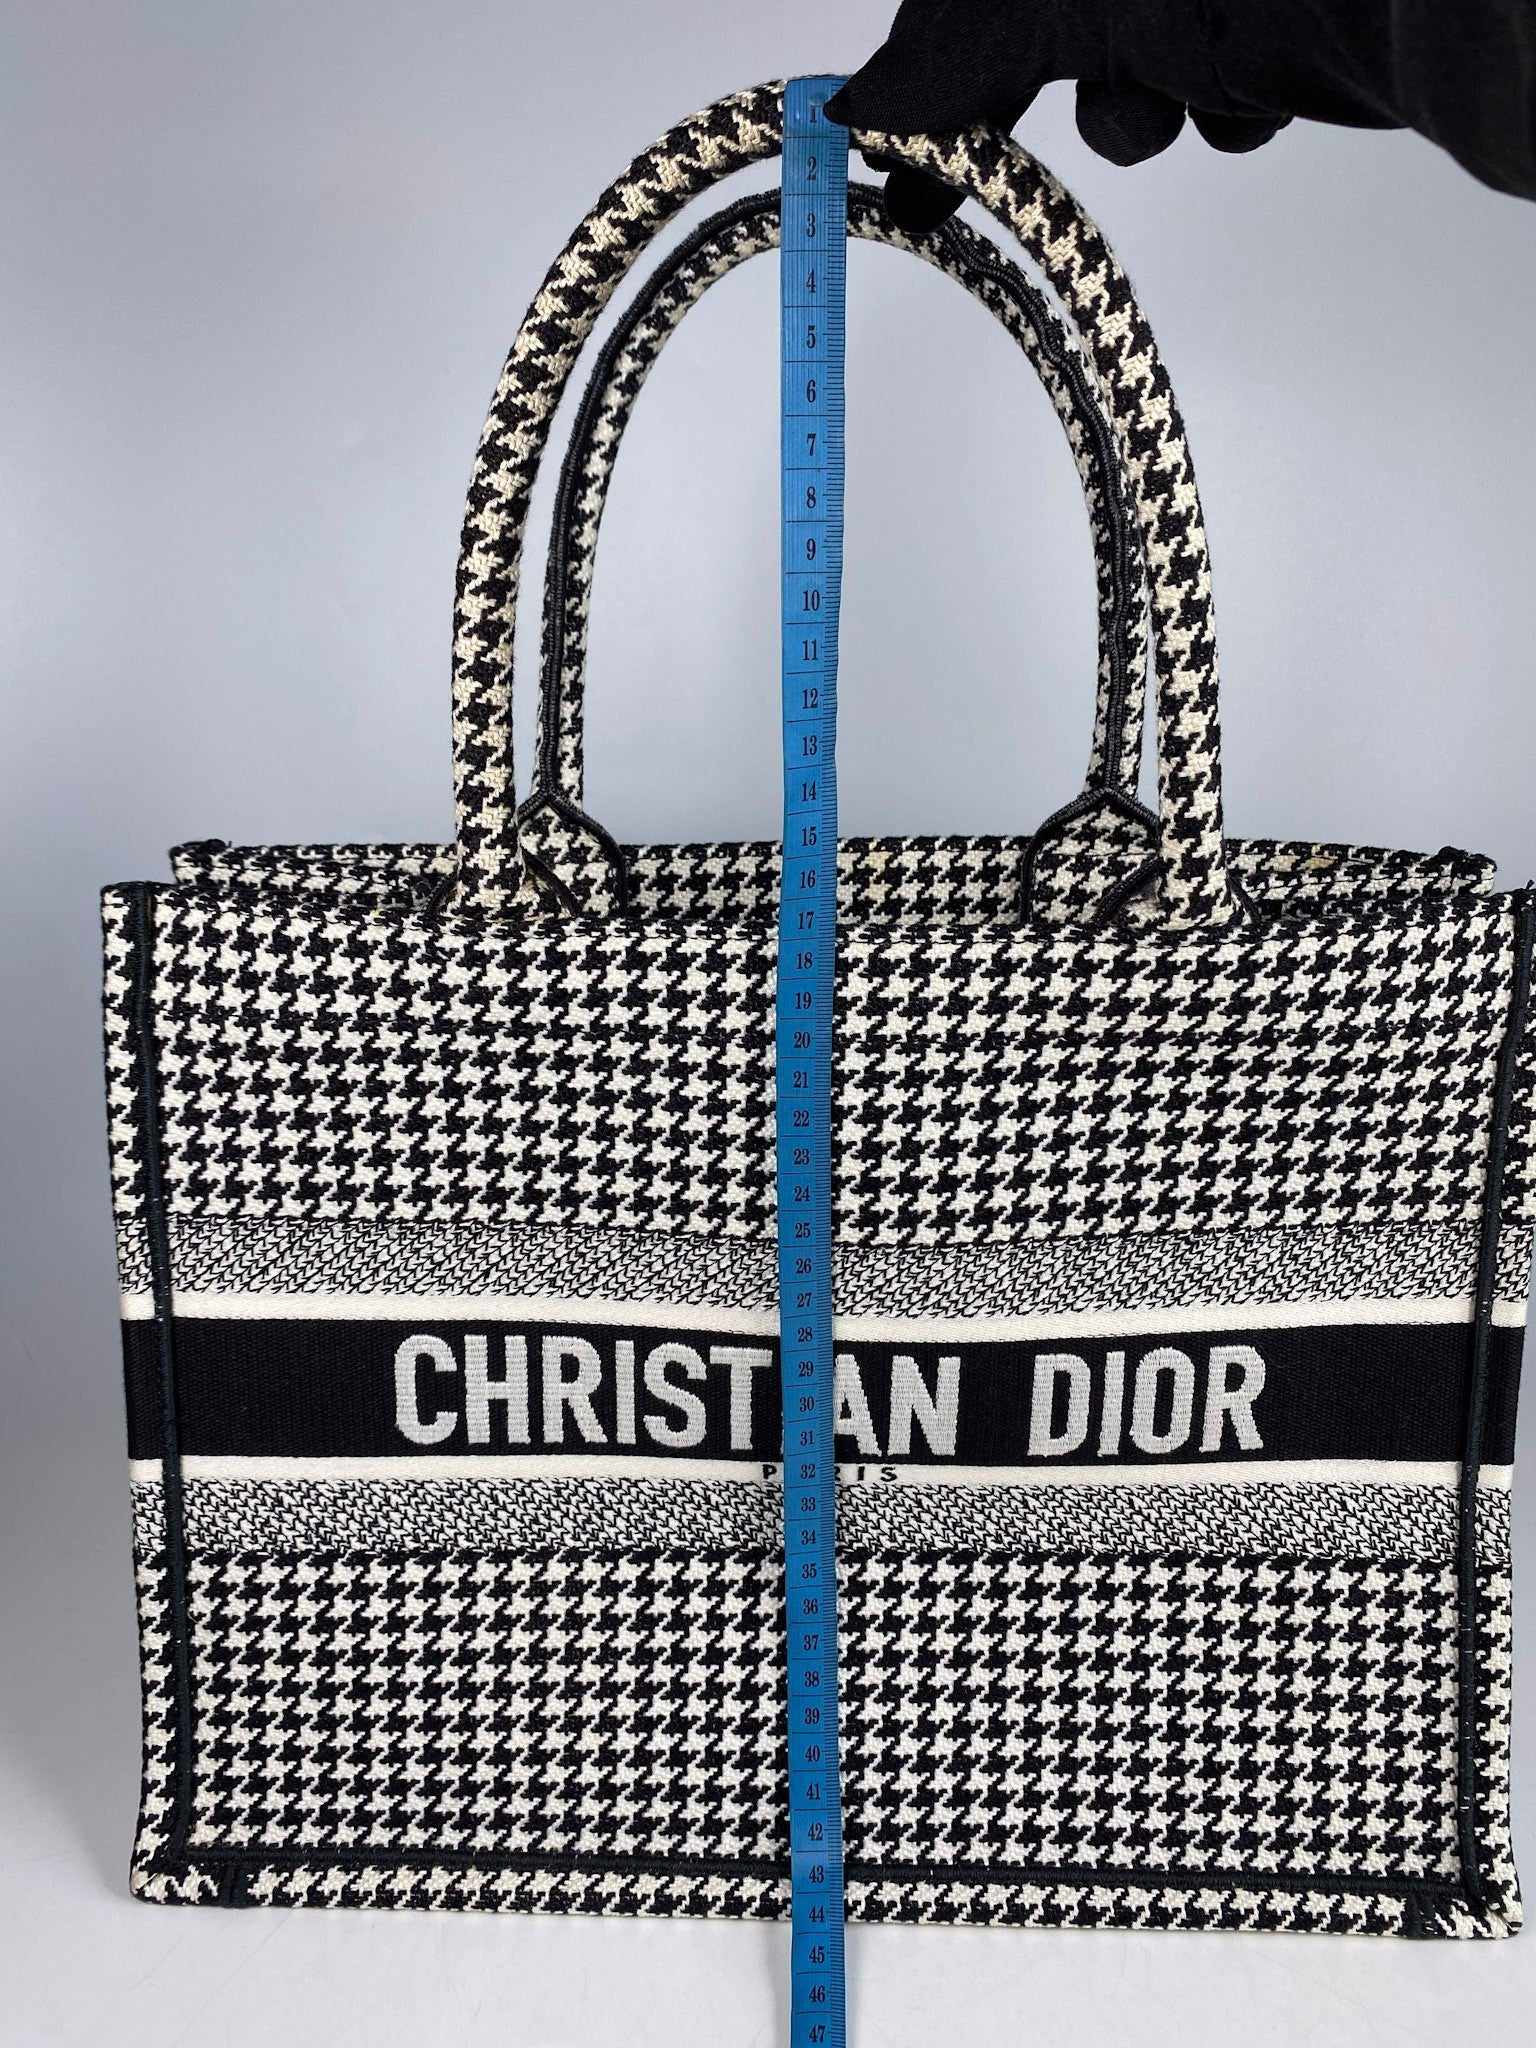 Christian Dior (Old Small) Houndstooth Black and White Book Tote